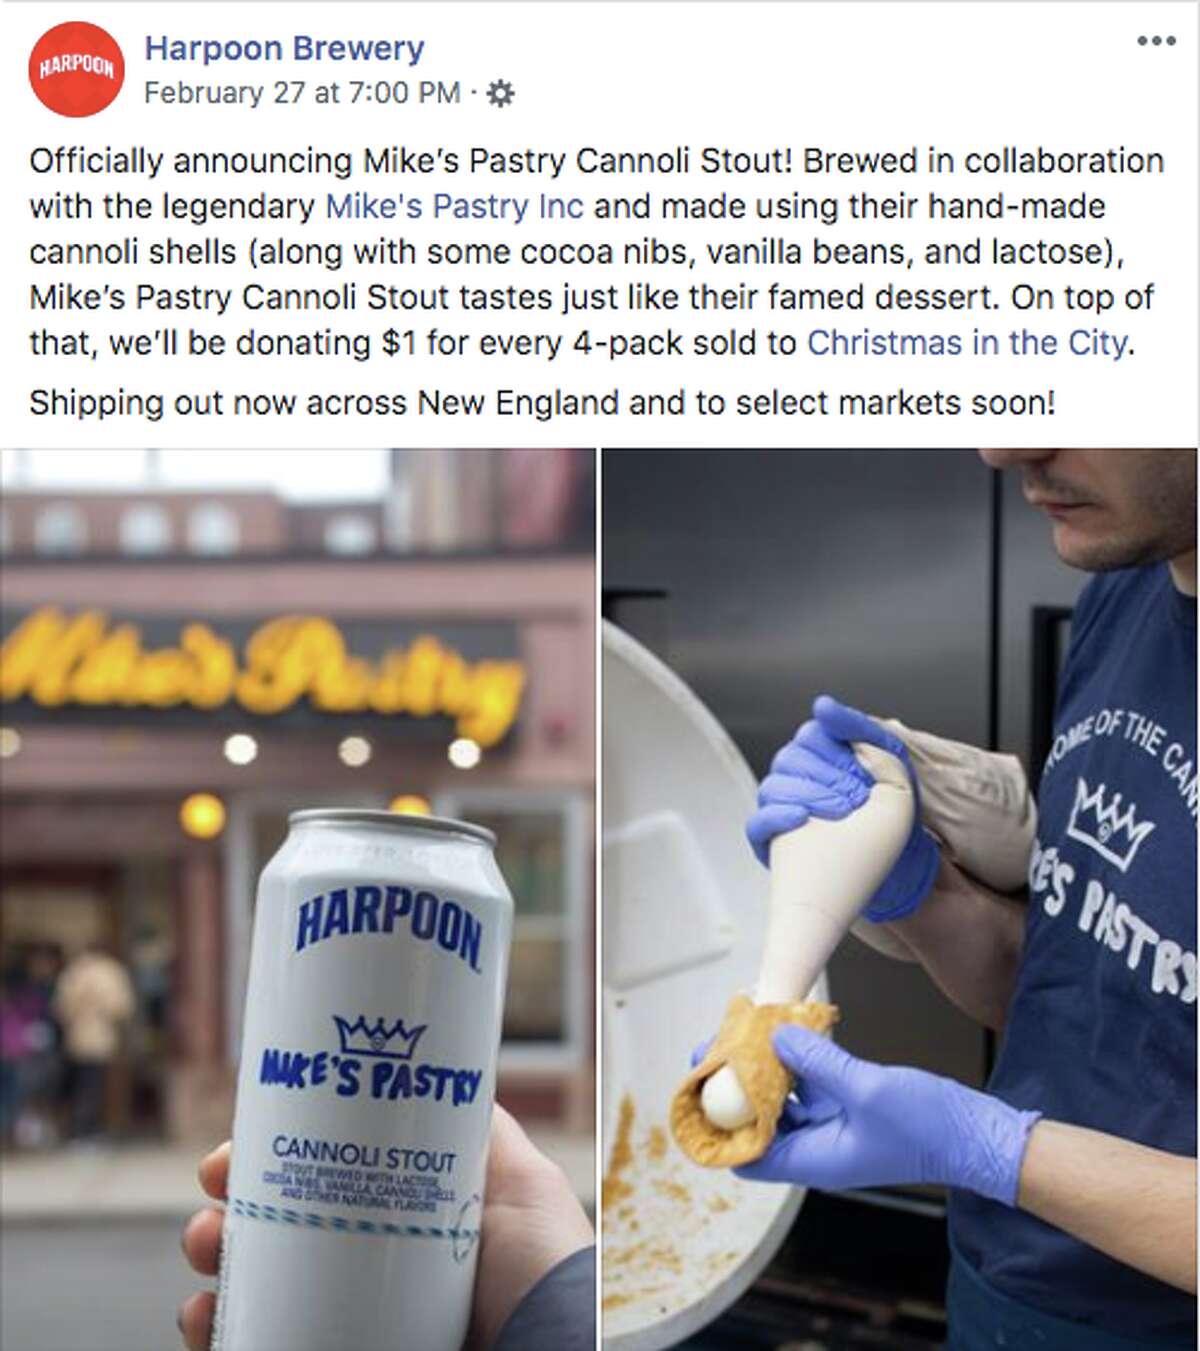 Mike's Pastry has announced a partnership with Boston-based Harpoon Brewery for a brand new cannoli-inspired stout beer, according to Eater Boston.